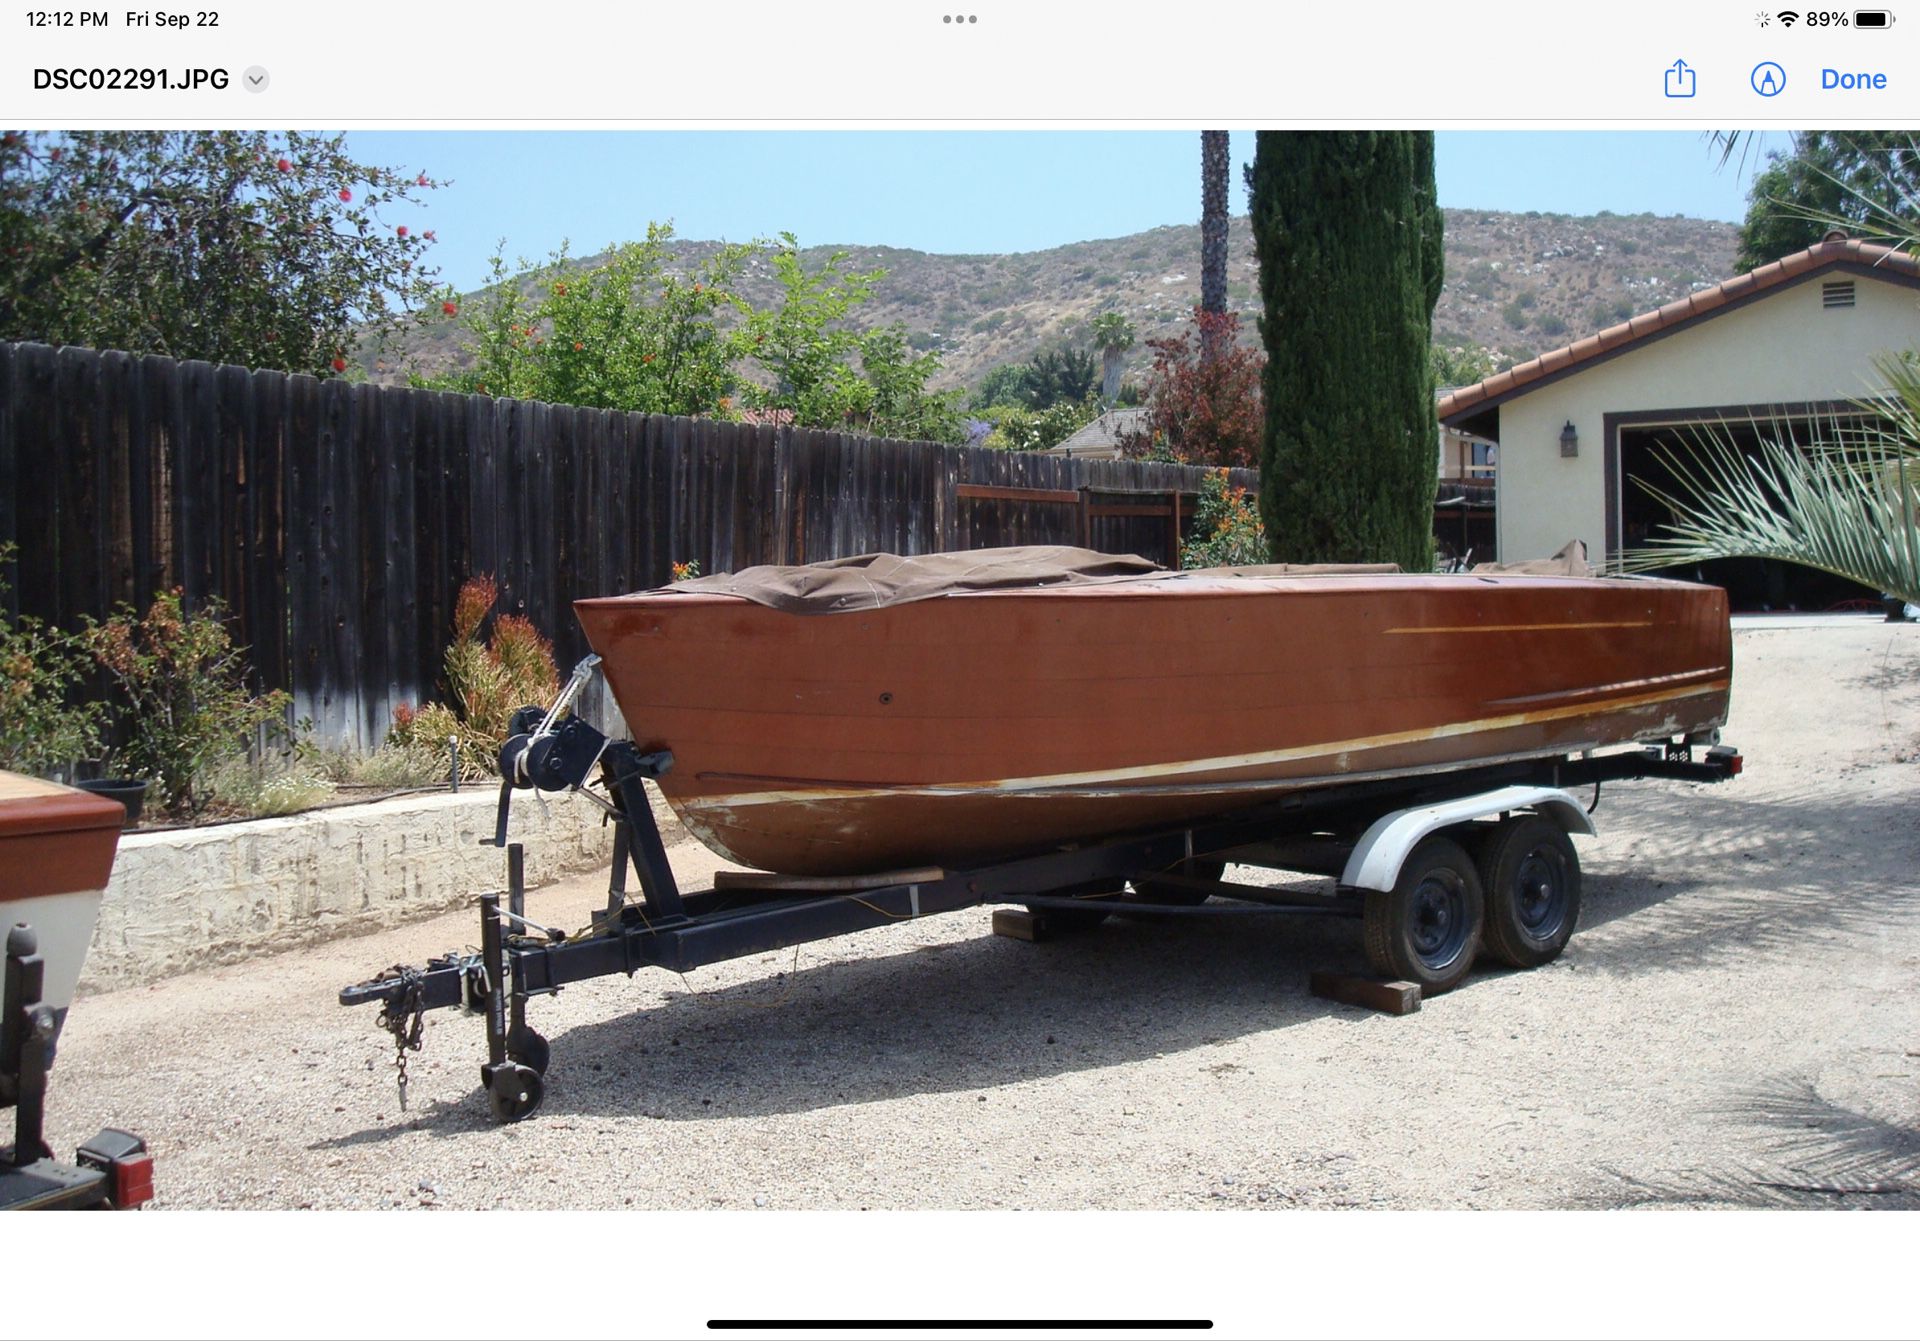 1960 Century Speed Boat With 327 Gray Marine Motor  Trailer Included (Fresh Water Only)